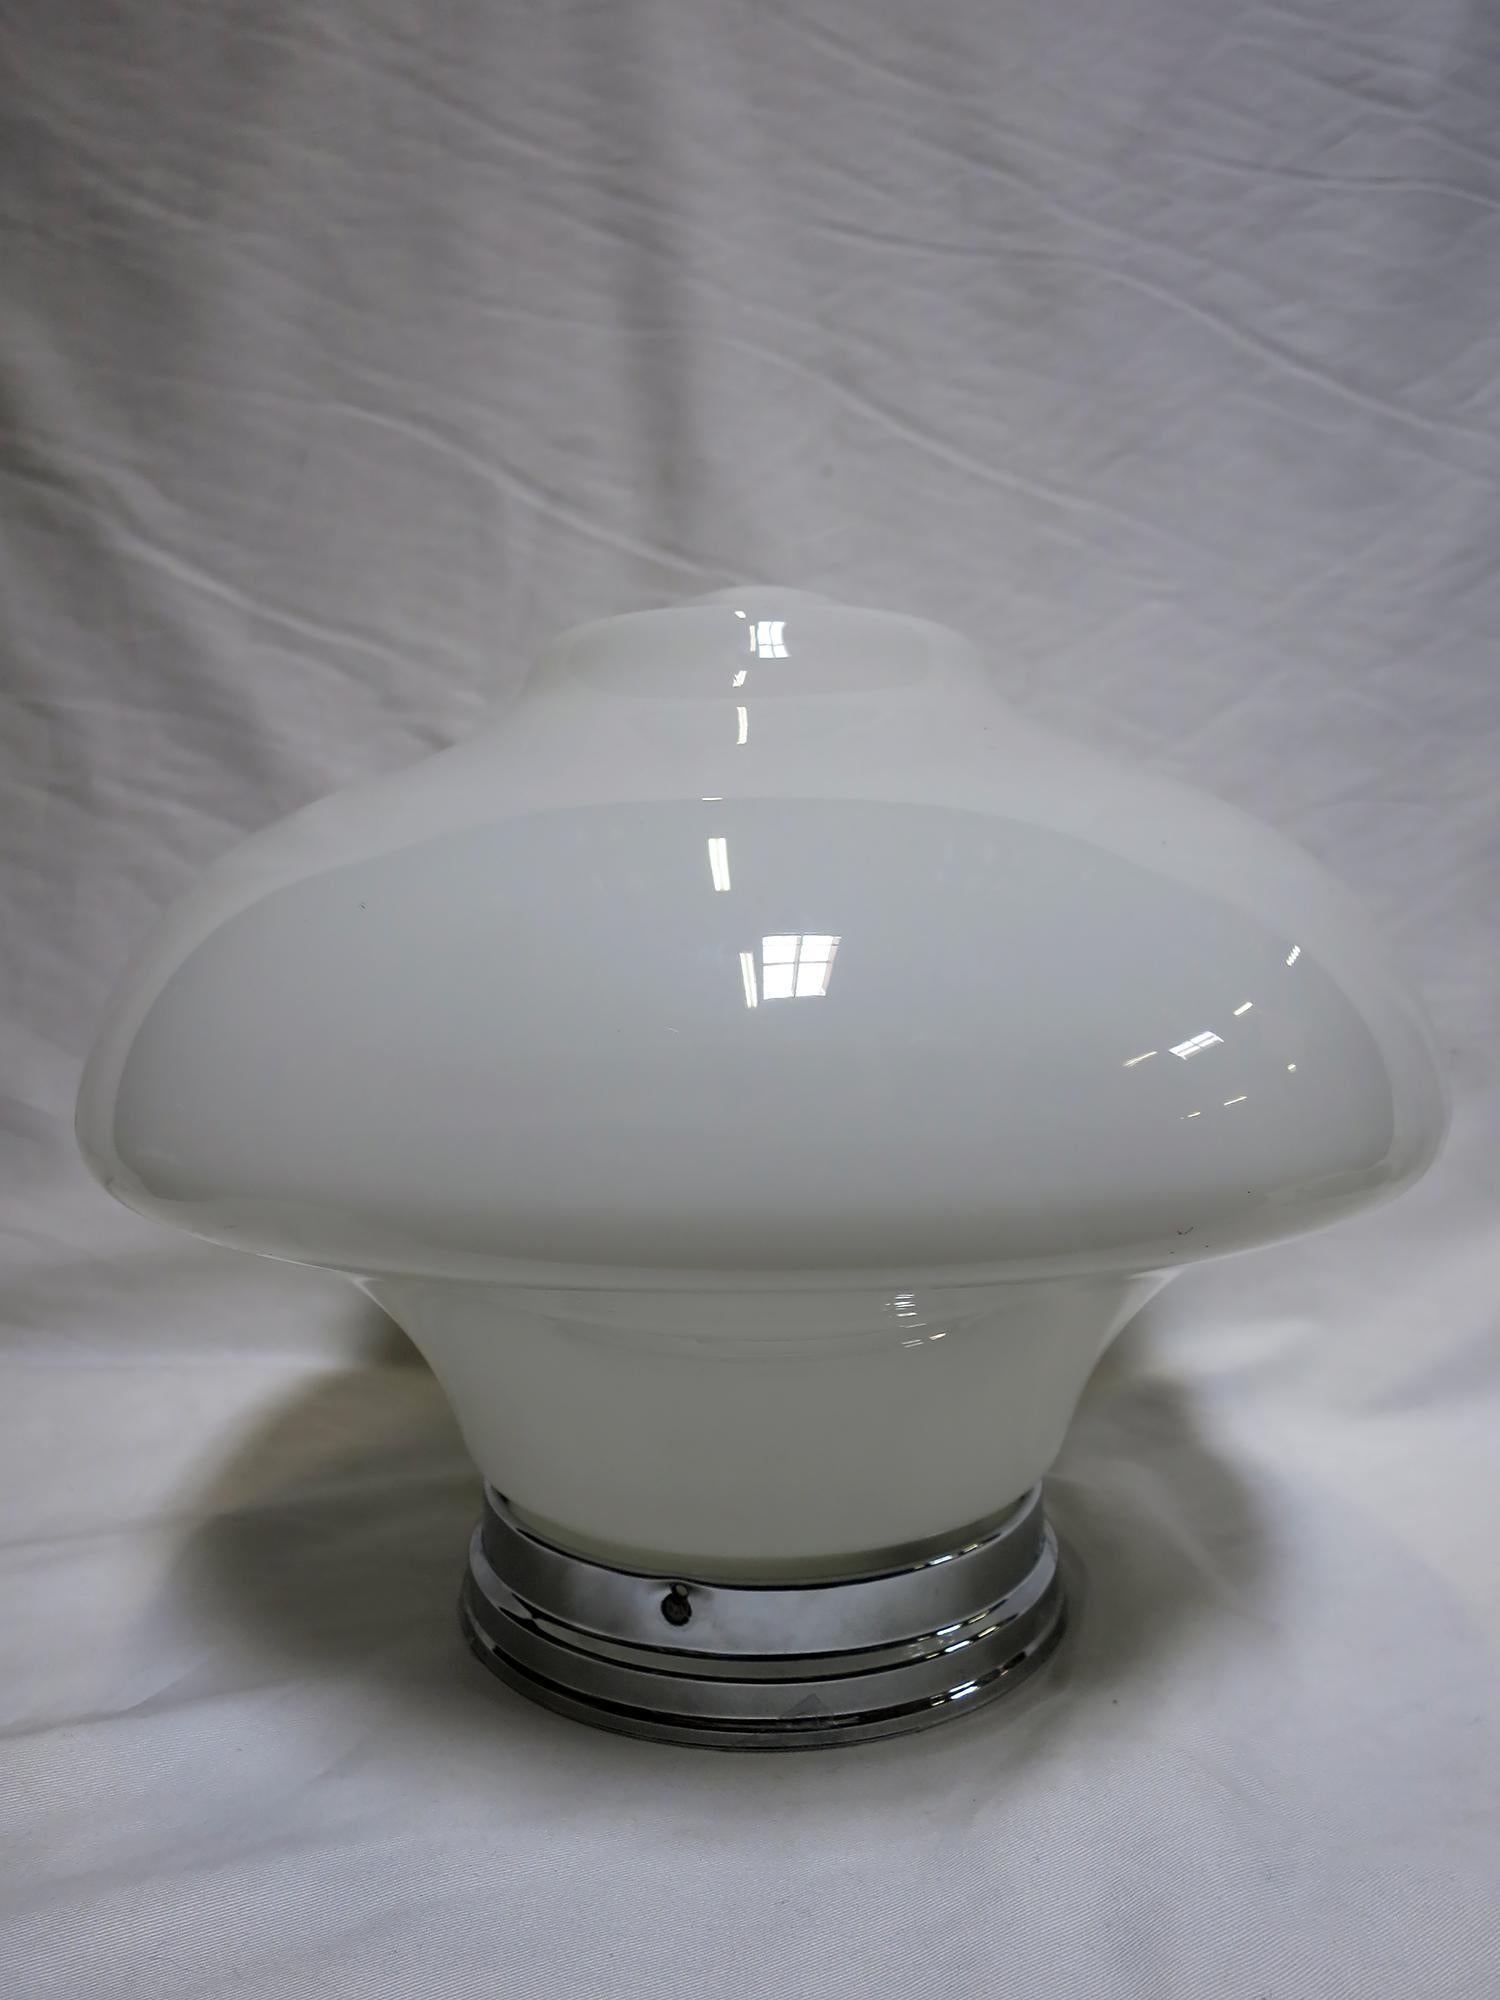 Once used everywhere from classrooms, libraries and courthouses alike, schoolhouse globes offered a practical and utilitarian design with solid, hard-working ambient lighting. Our globe features a large, bell-shape in Classic white milk glass that